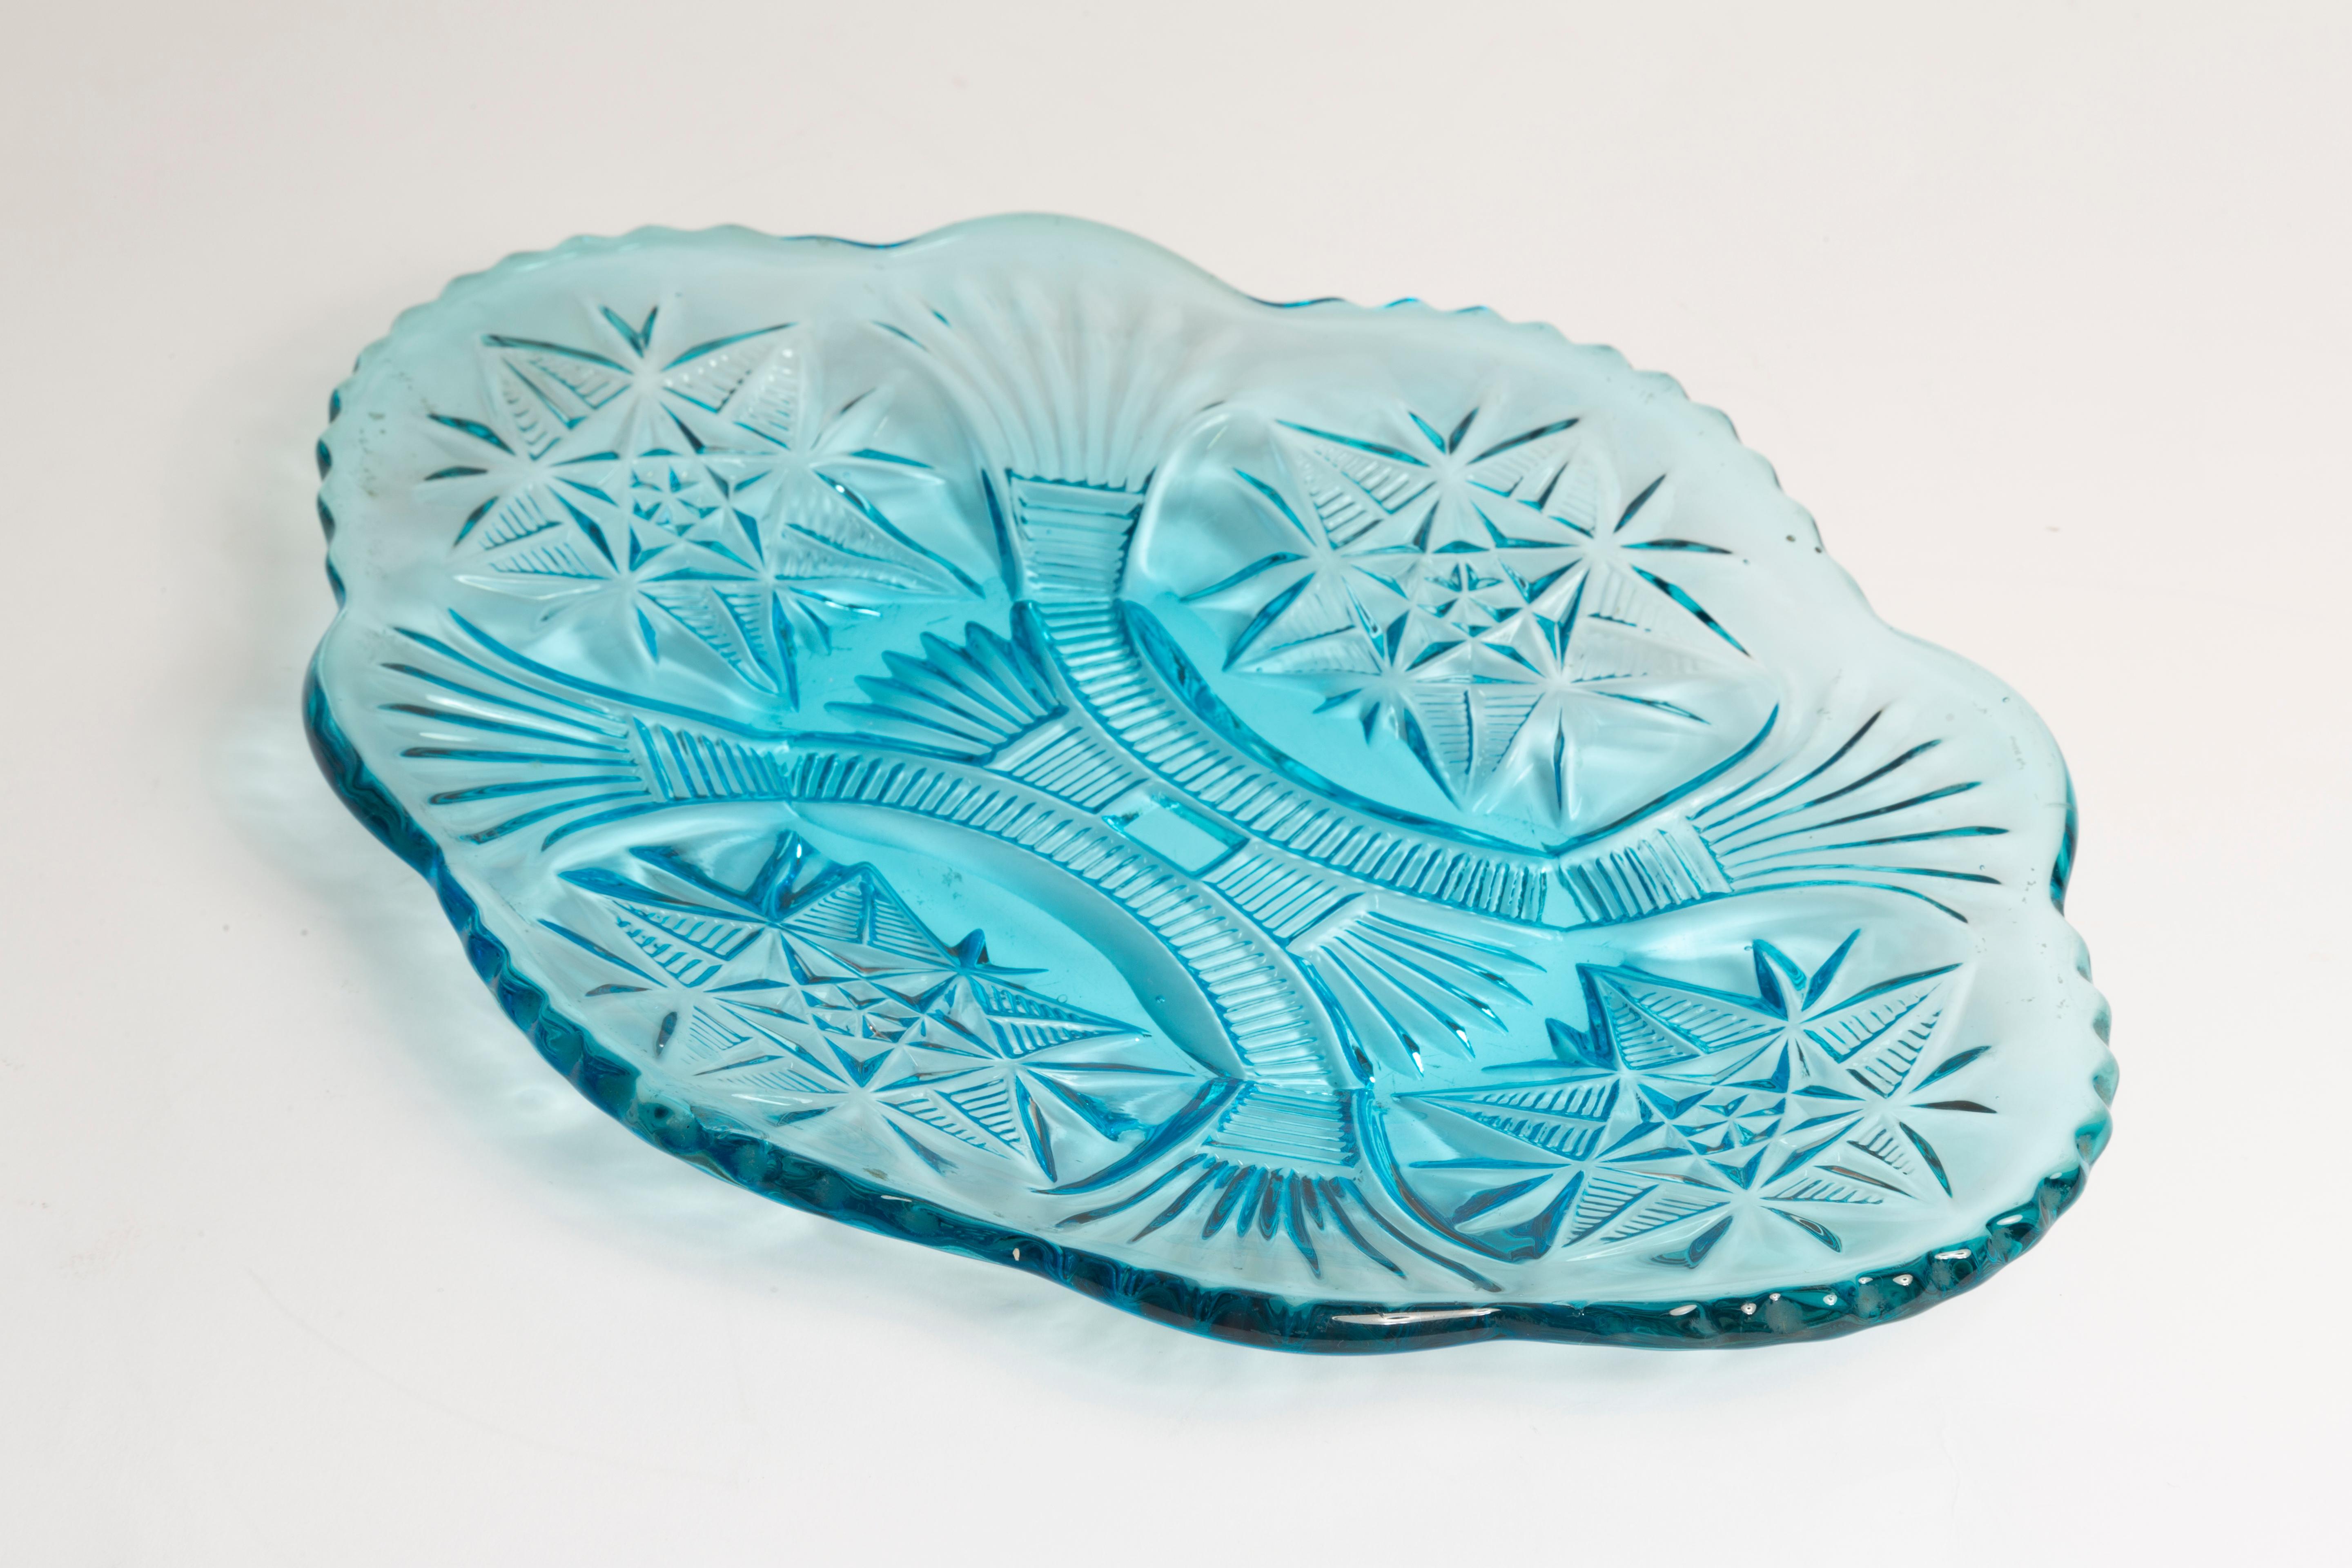 Ceramic Midcentury Light Blue Decorative Glass Plate, Italy, 1960s For Sale